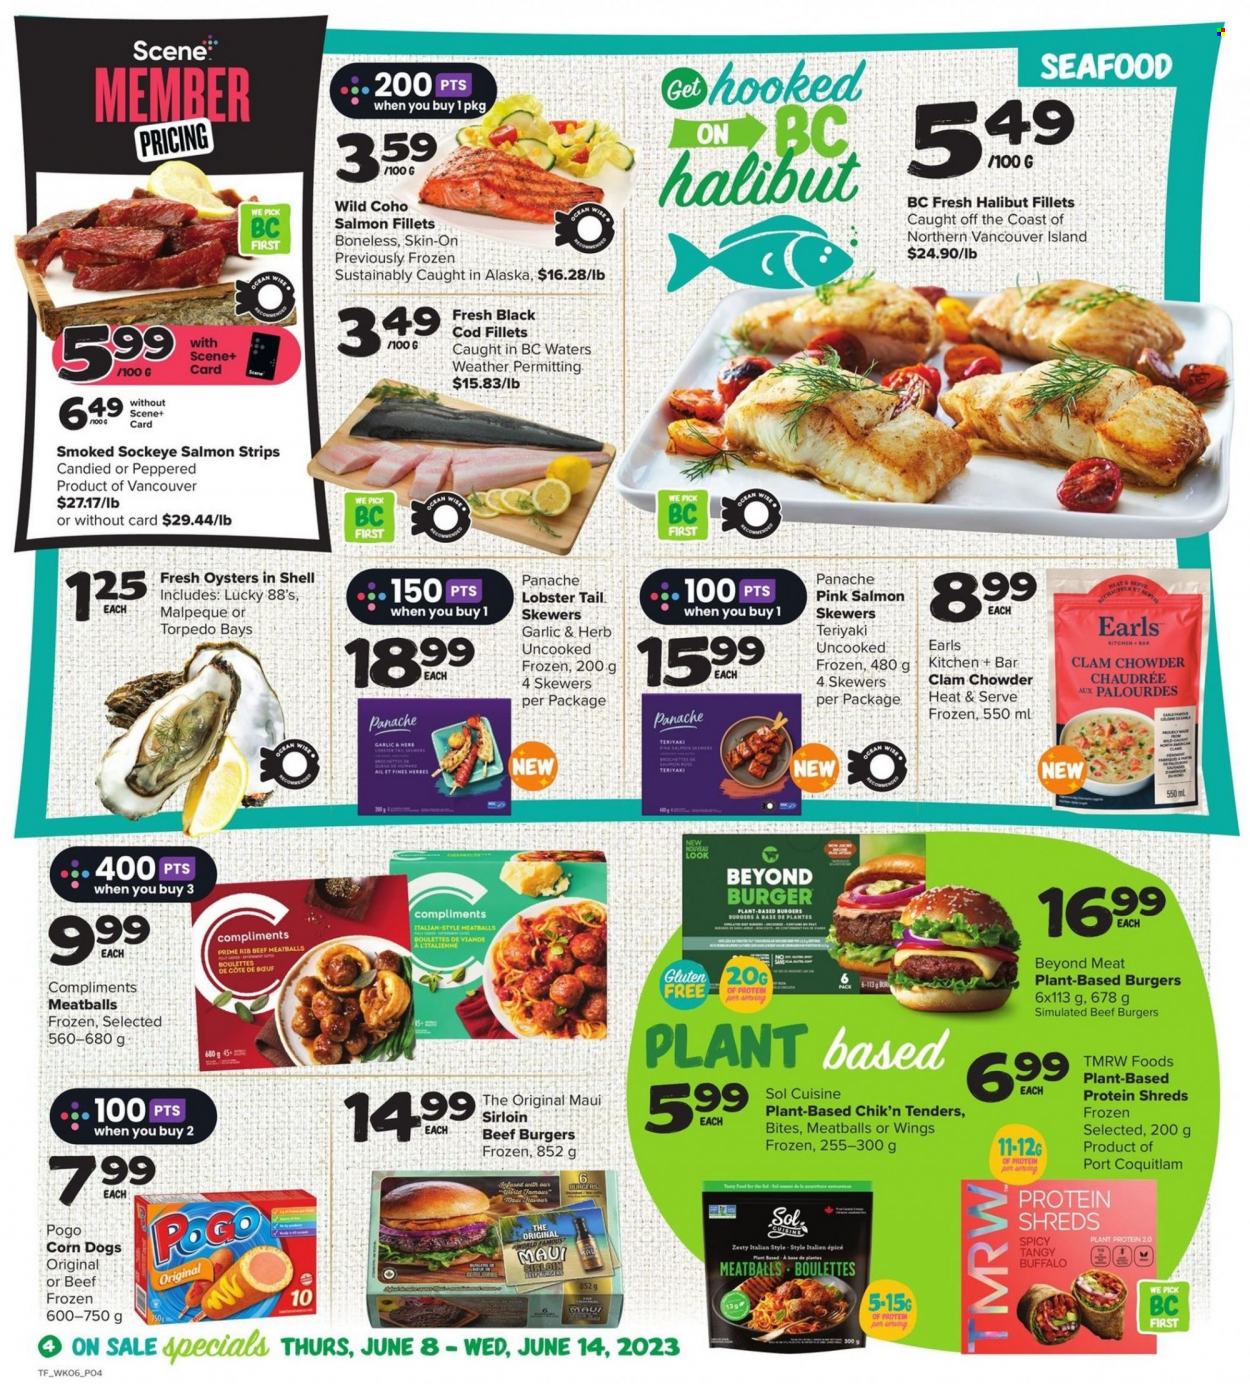 thumbnail - Thrifty Foods Flyer - June 08, 2023 - June 14, 2023 - Sales products - cod, fish fillets, lobster, salmon, salmon fillet, halibut, oysters, seafood, lobster tail, meatballs, hamburger, beef burger, strips, plant protein, clam chowder, Sol. Page 5.